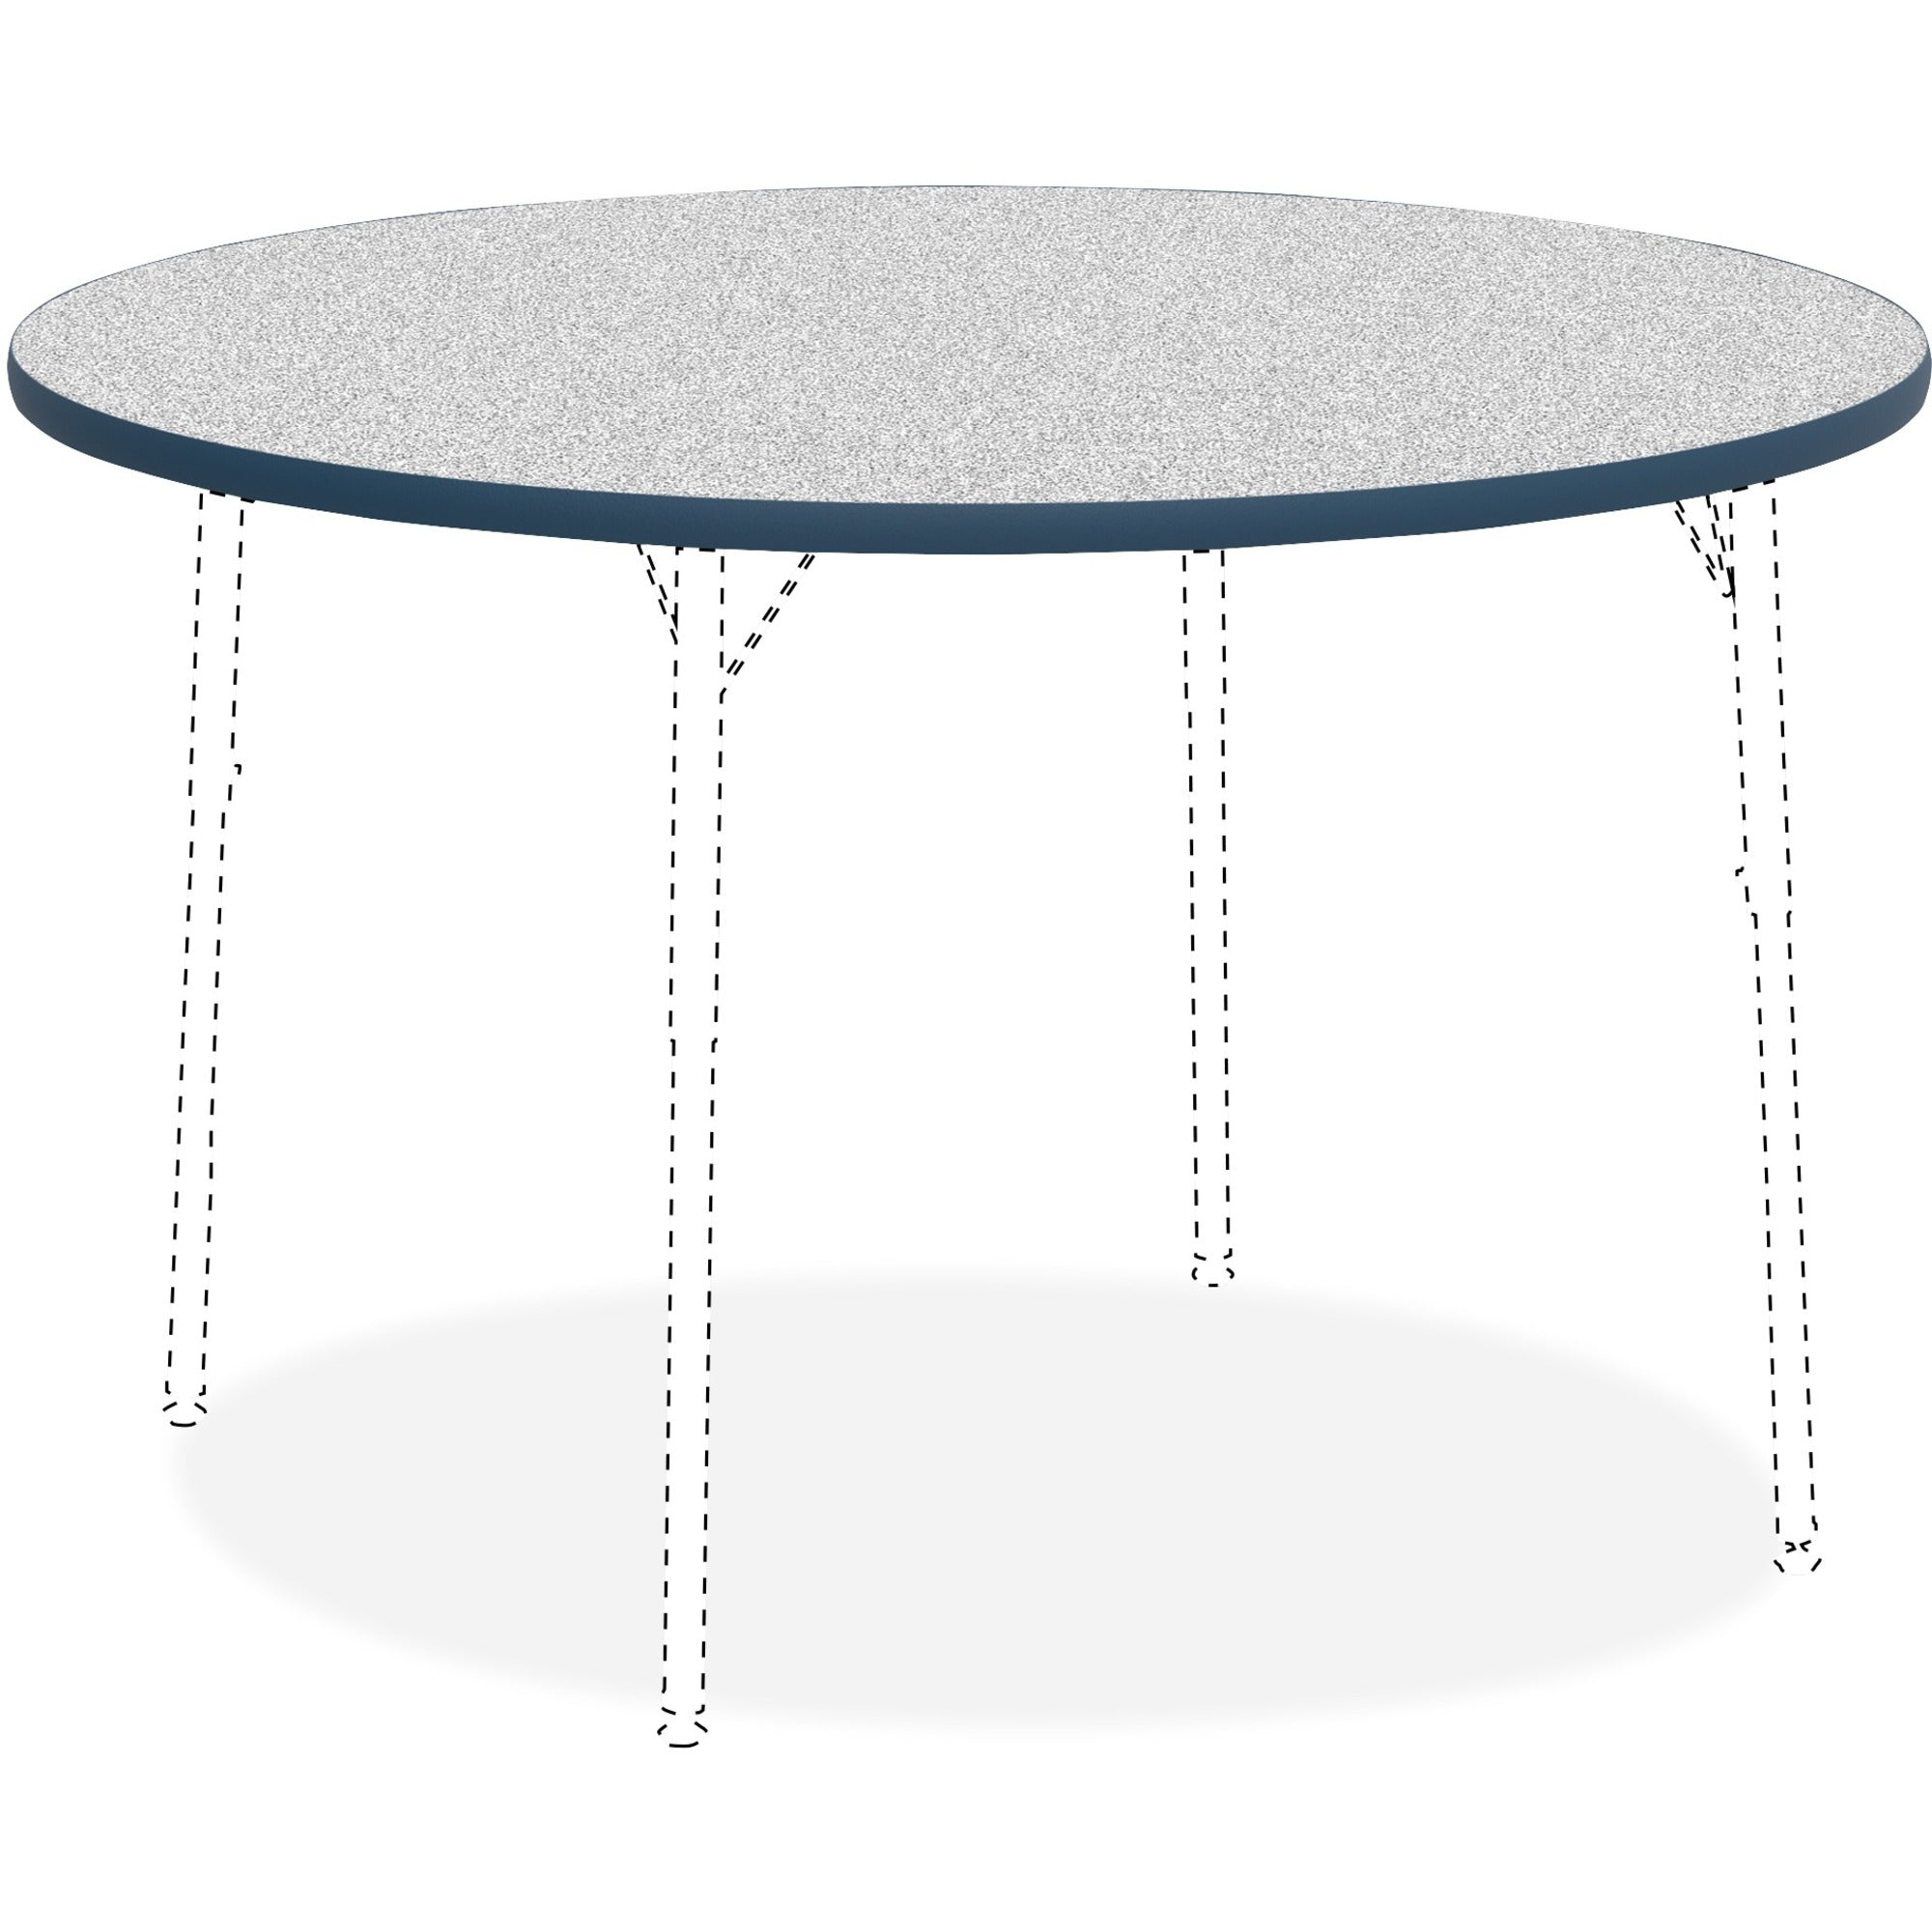 lorell-classroom-activity-tabletop-for-table-topgray-nebula-round-high-pressure-laminate-hpl-top-x-113-table-top-thickness-x-48-table-top-diameter-assembly-required-1-each_llr99922 - 1